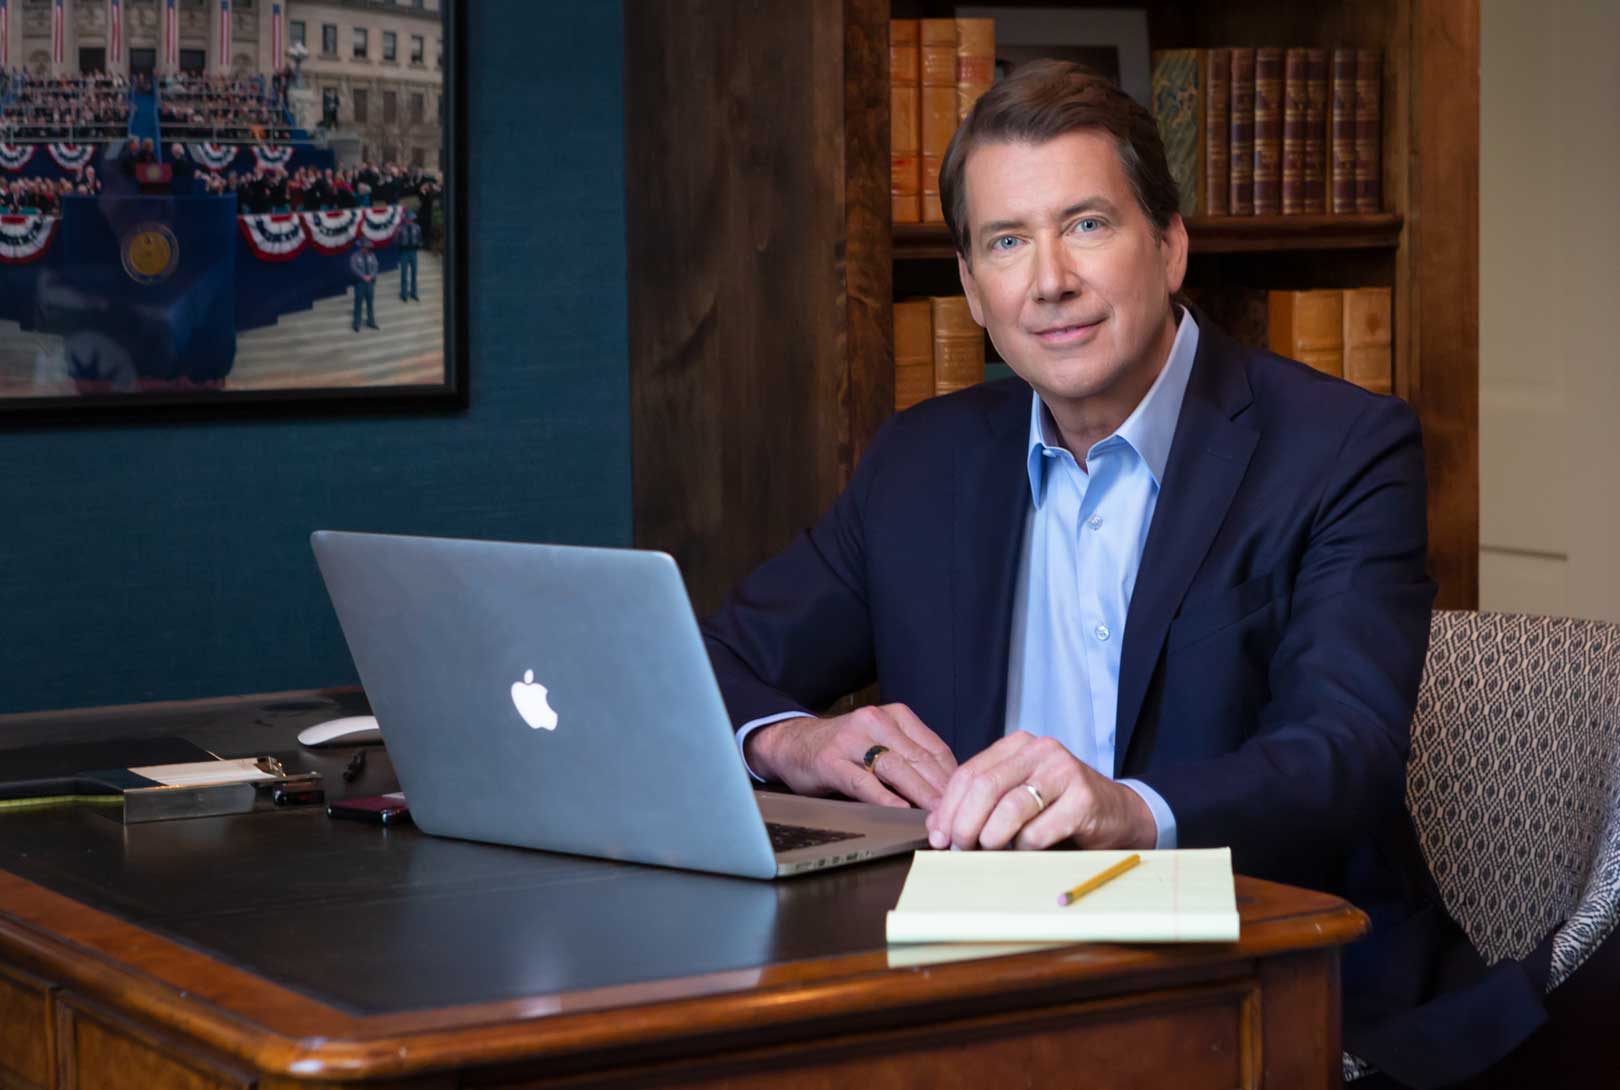 Bill Hagerty in a blazer and blue shirt in his home office sitting at desk with laptop